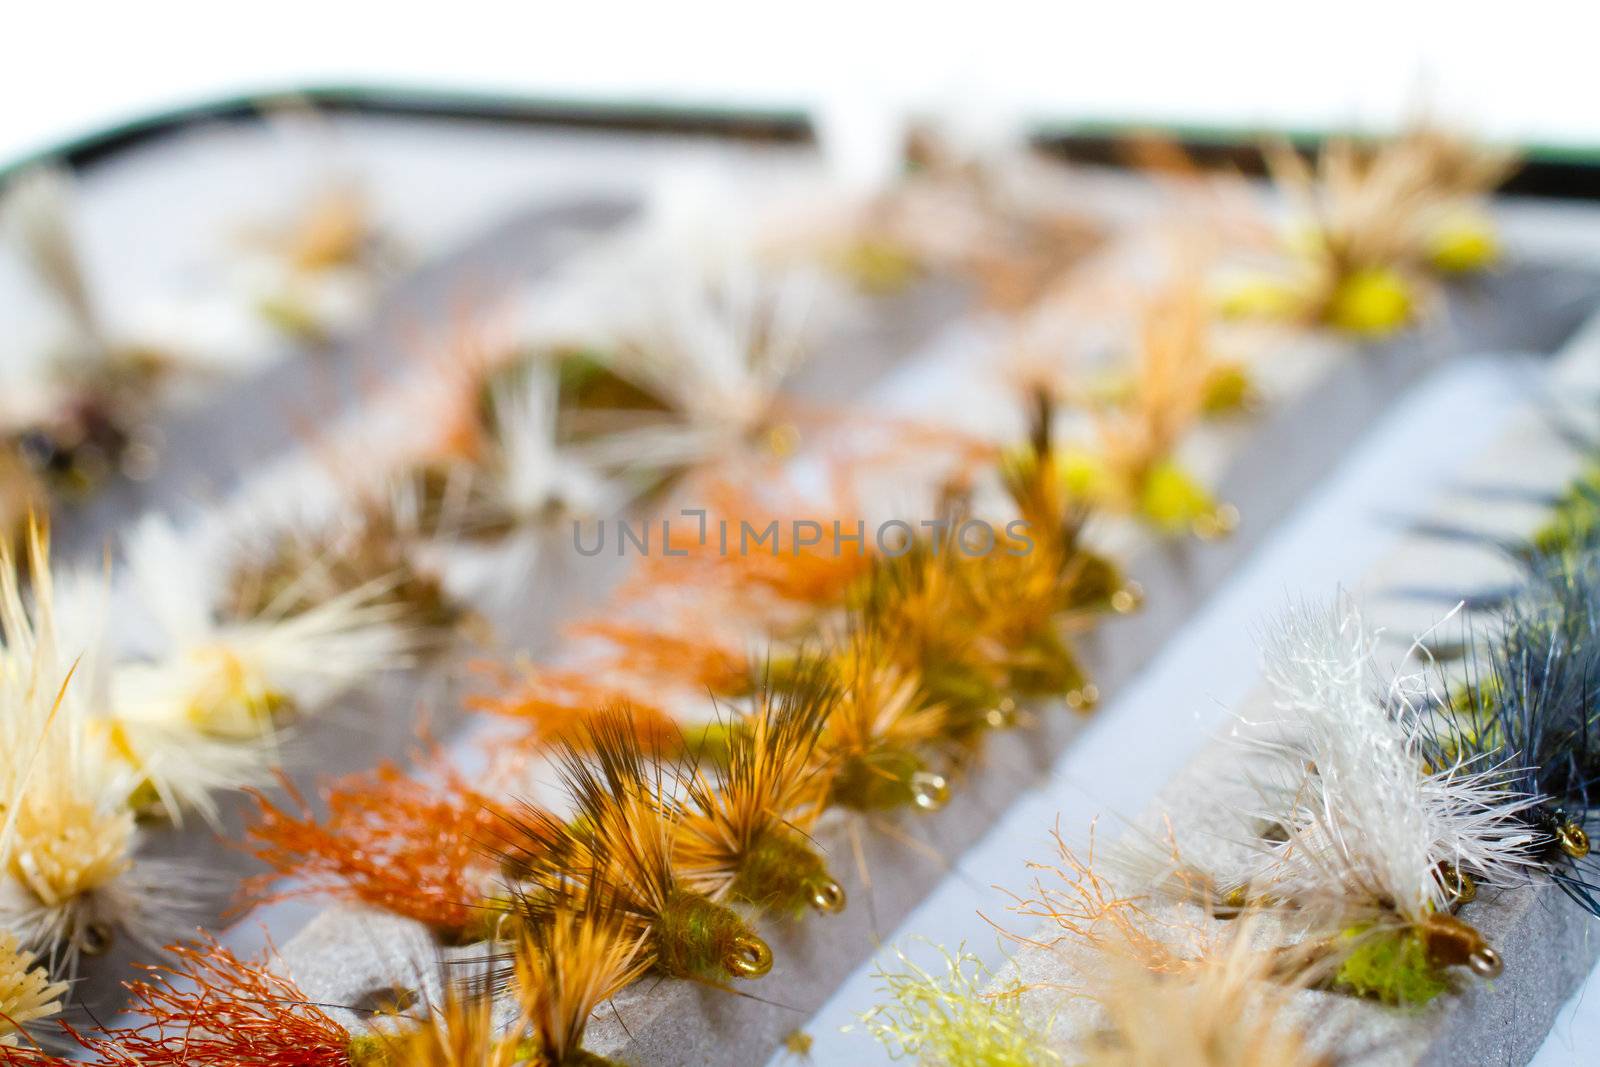 Fly Box Detail Dry Flies by joshuaraineyphotography